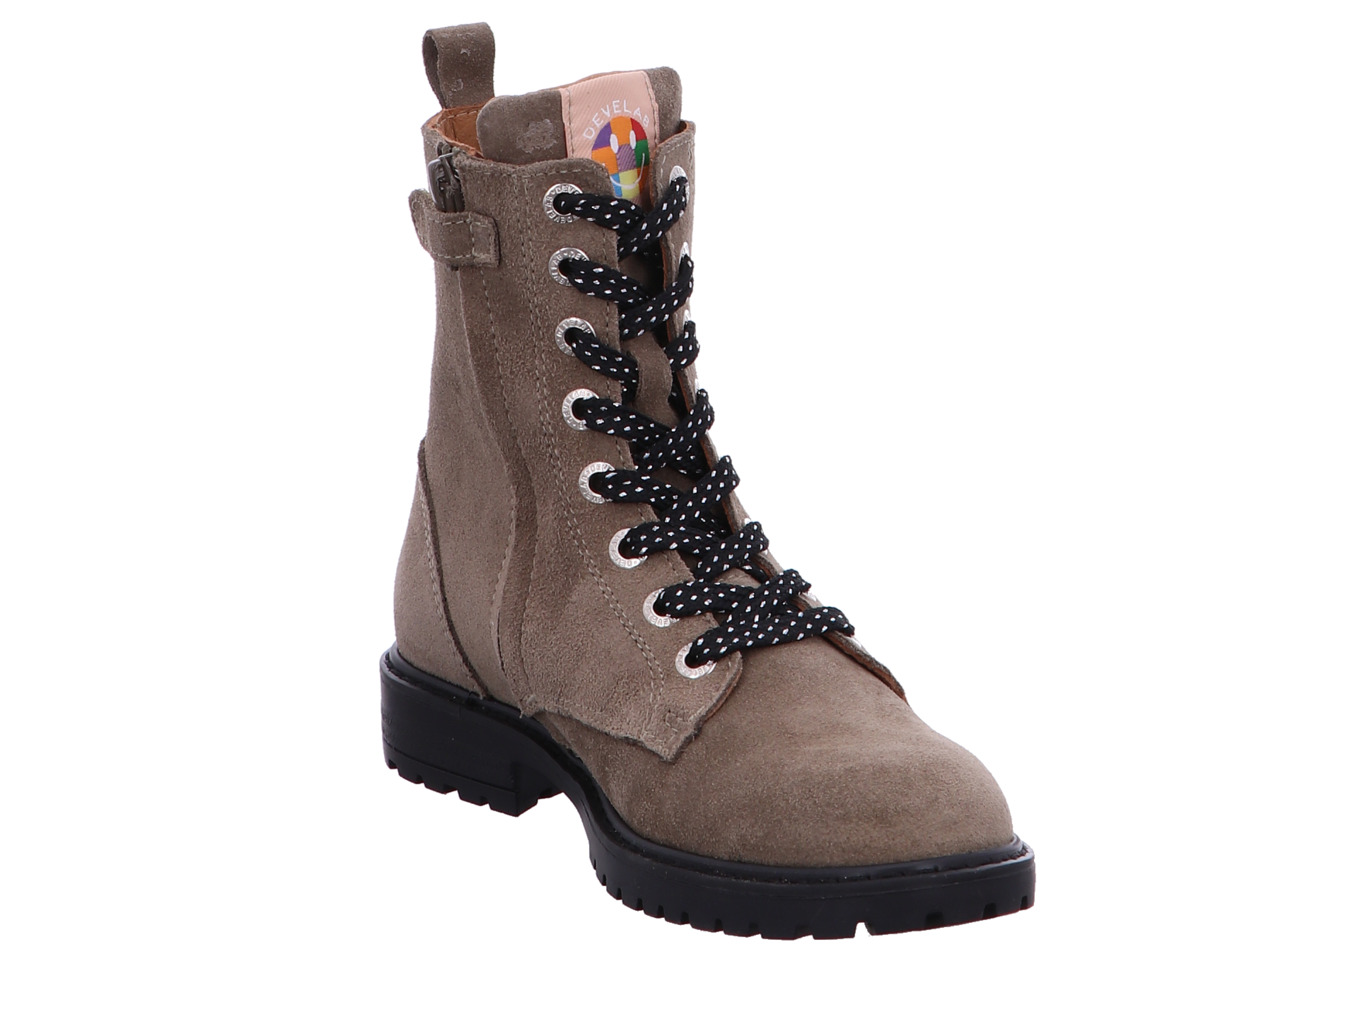 develab_girls_mid_boot_laces_42850_233_6160